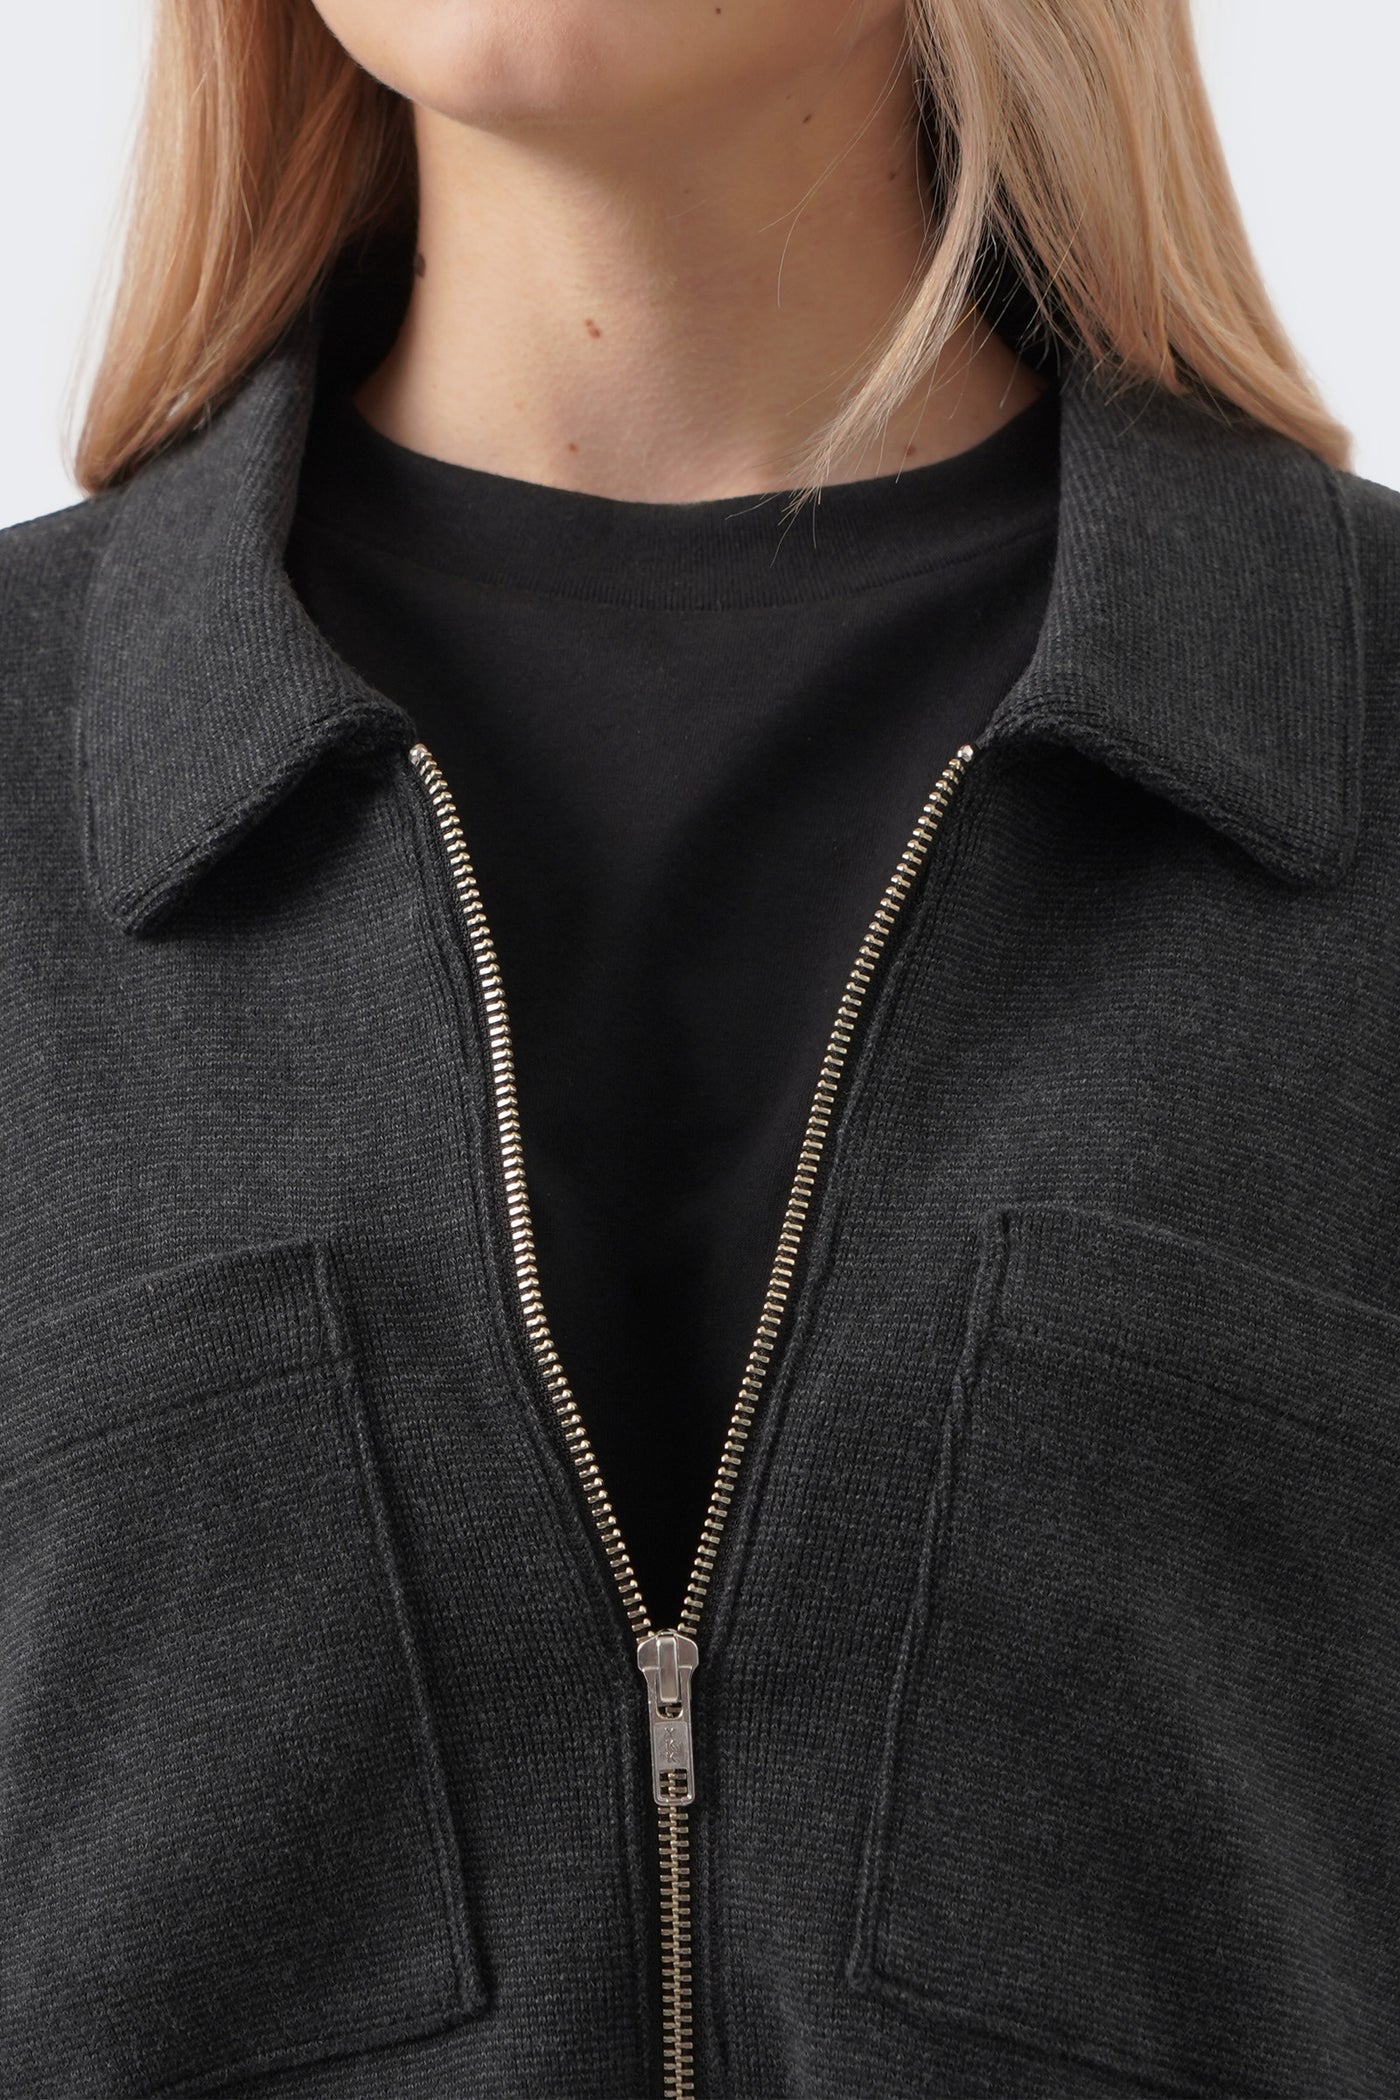 Women's Collared Zip Up Jacket with Patch Pockets